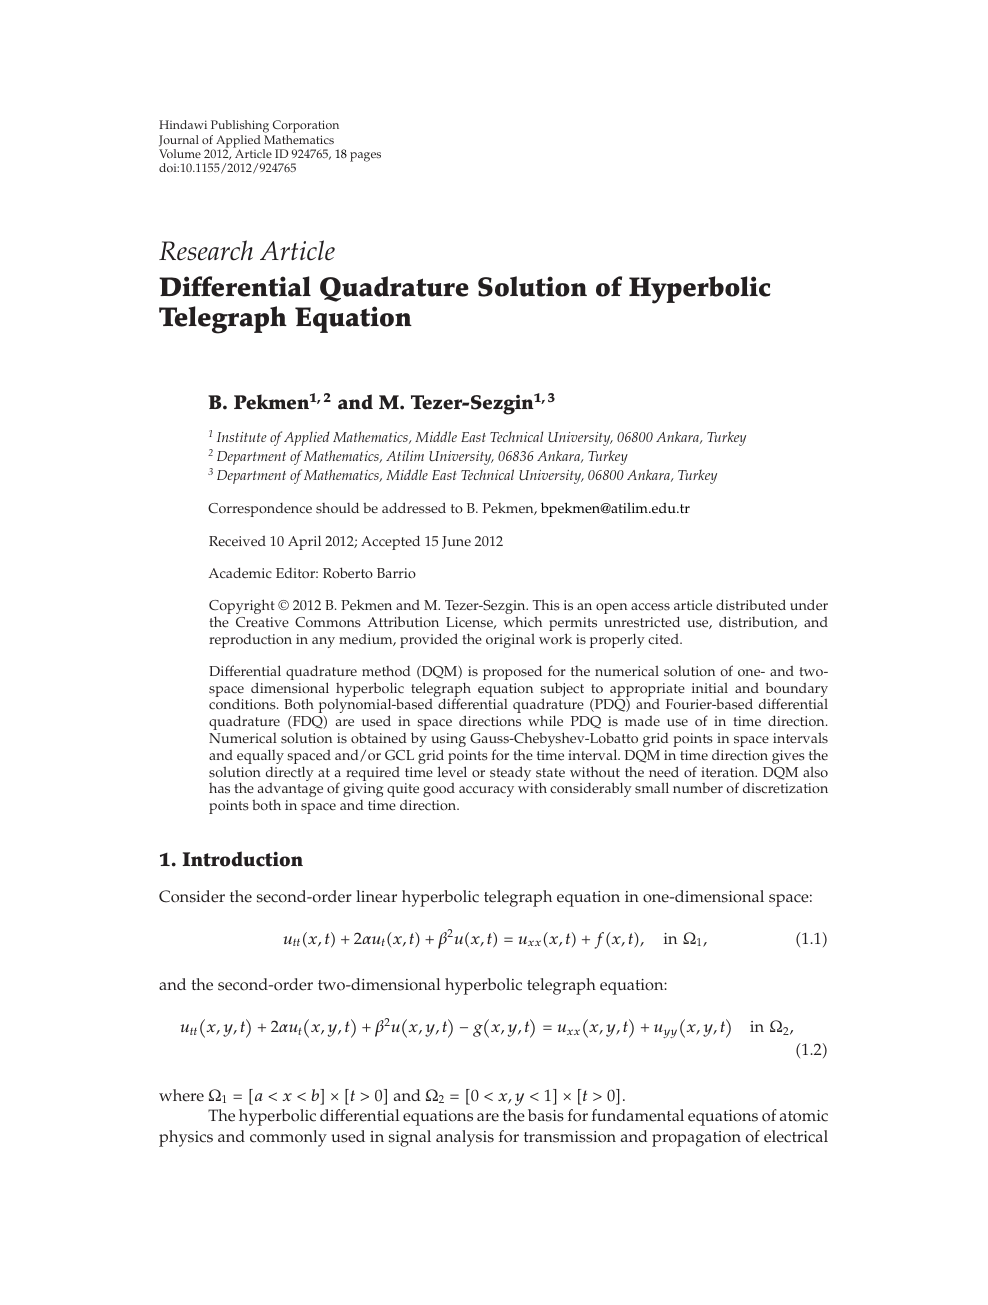 Differential Quadrature Solution Of Hyperbolic Telegraph Equation Topic Of Research Paper In Mathematics Download Scholarly Article Pdf And Read For Free On Cyberleninka Open Science Hub